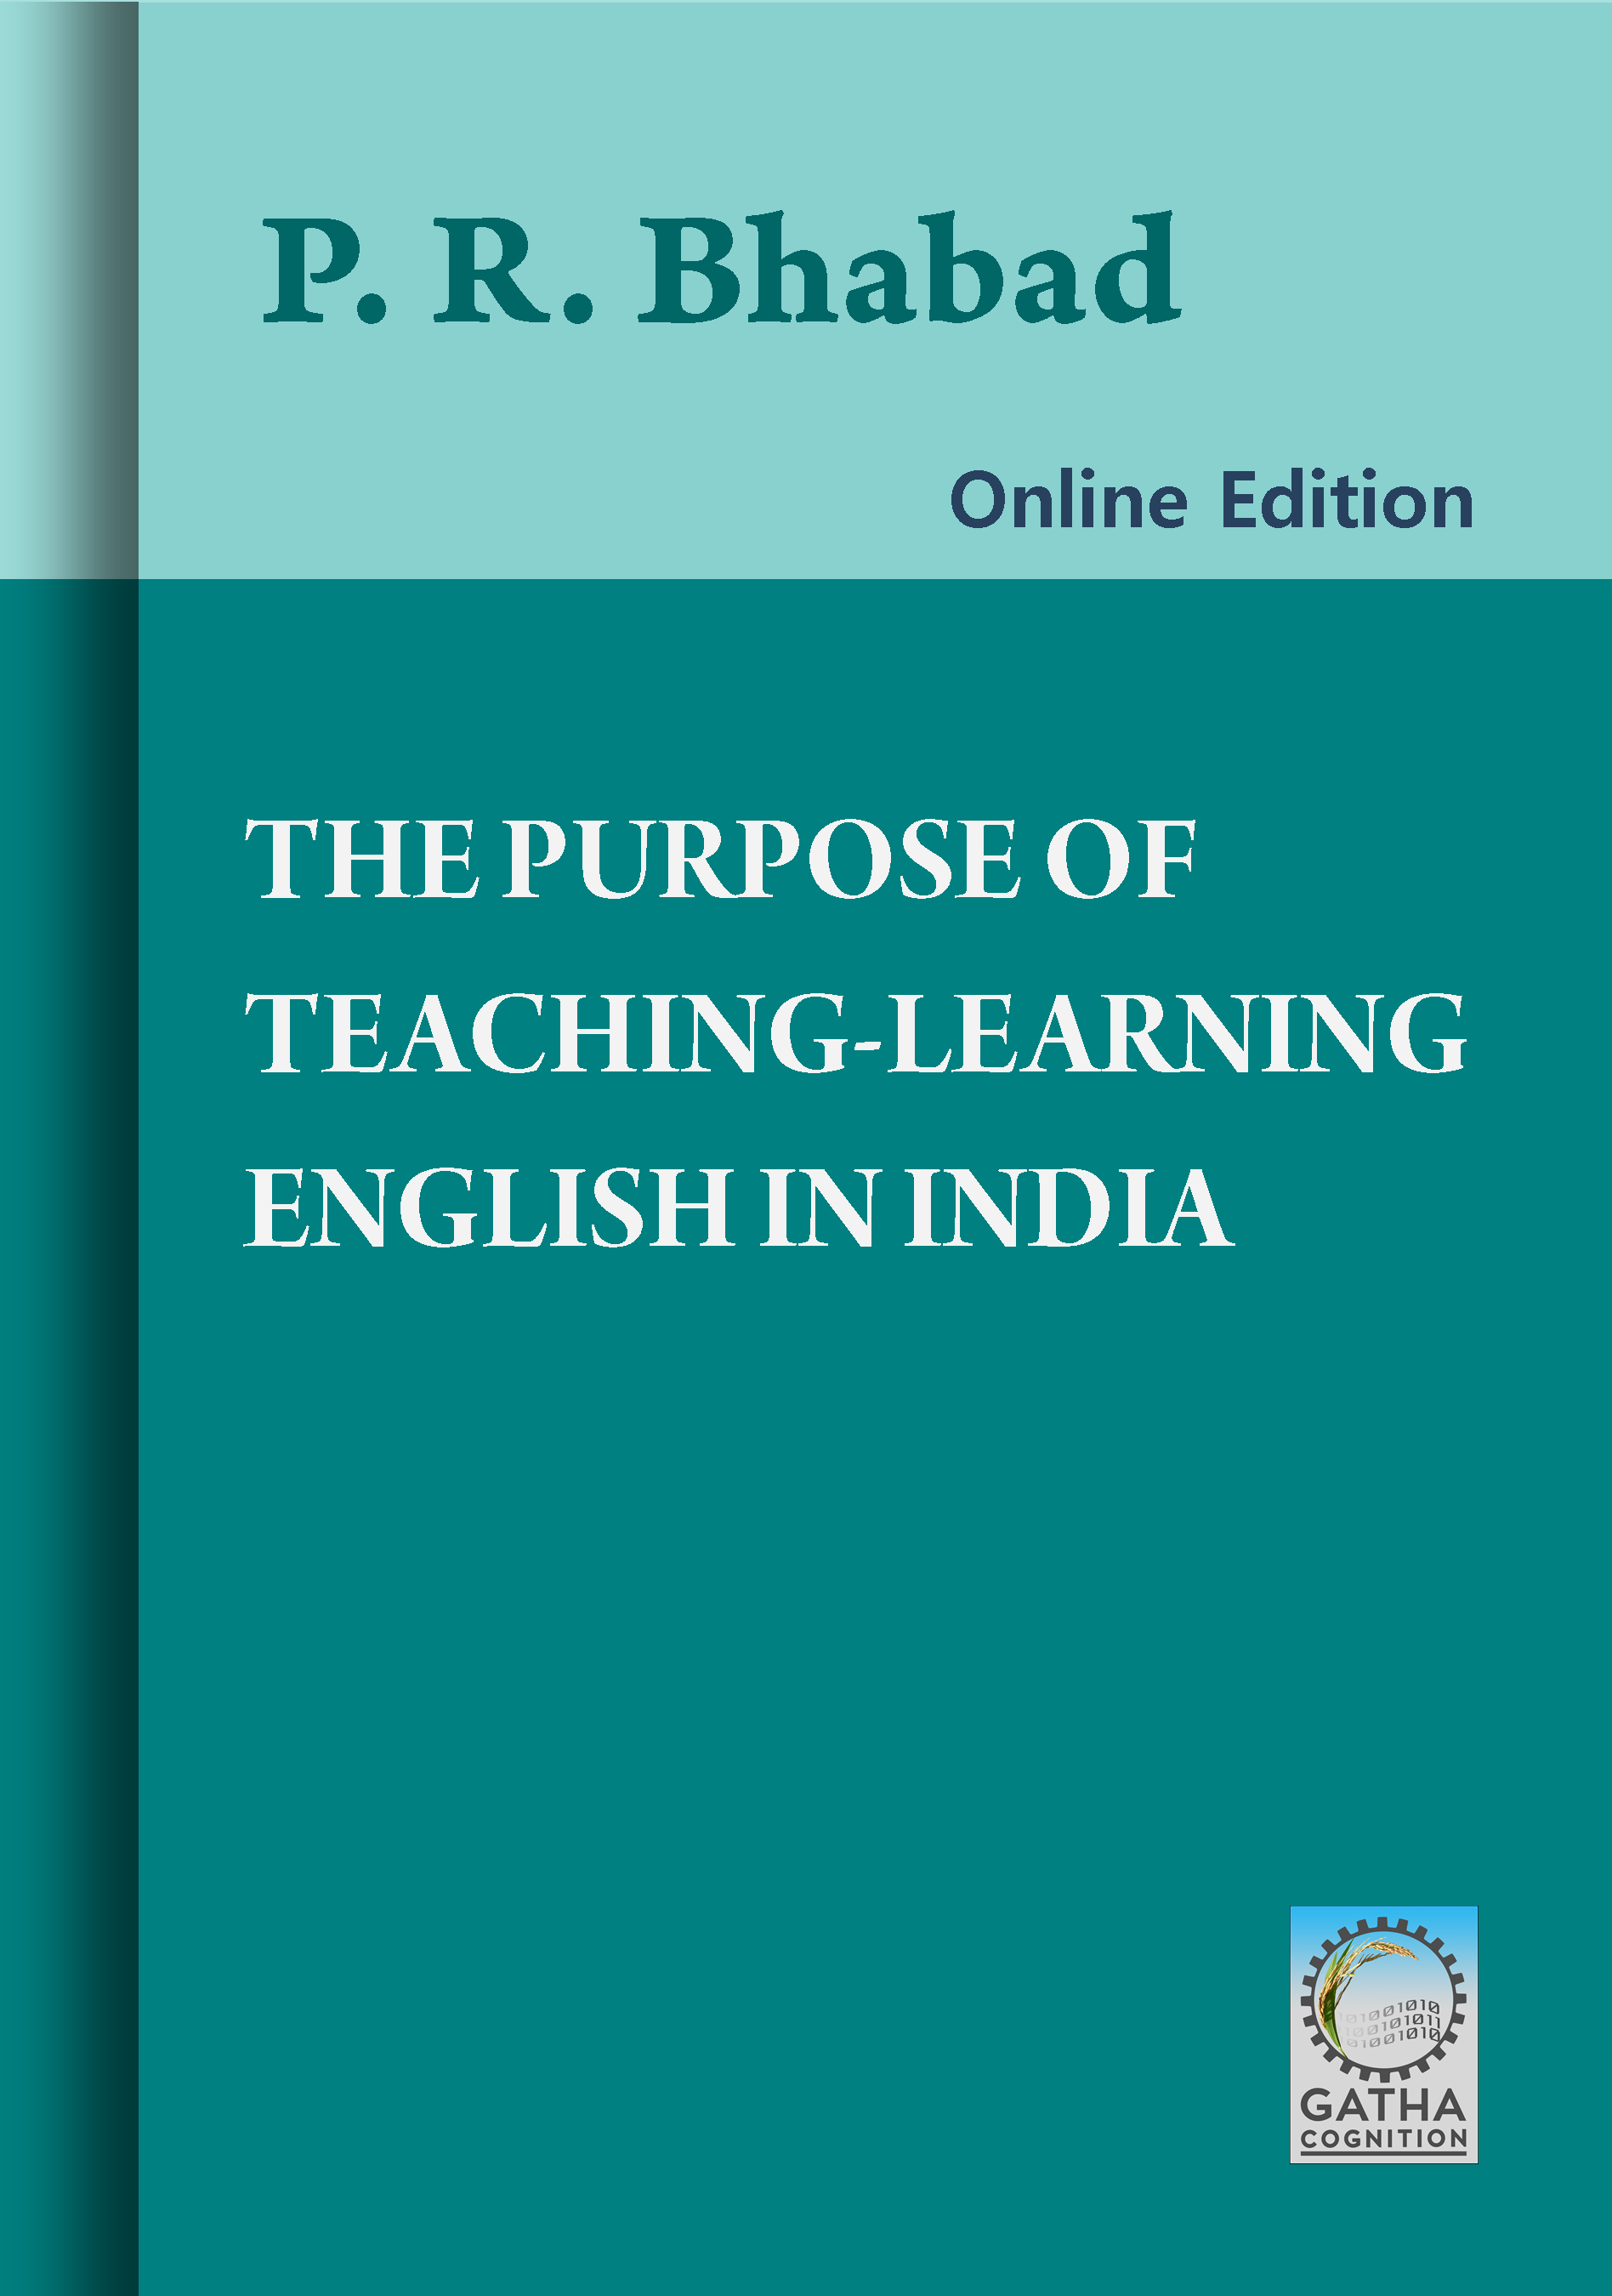 The Purpose of Teaching-Learning English in India